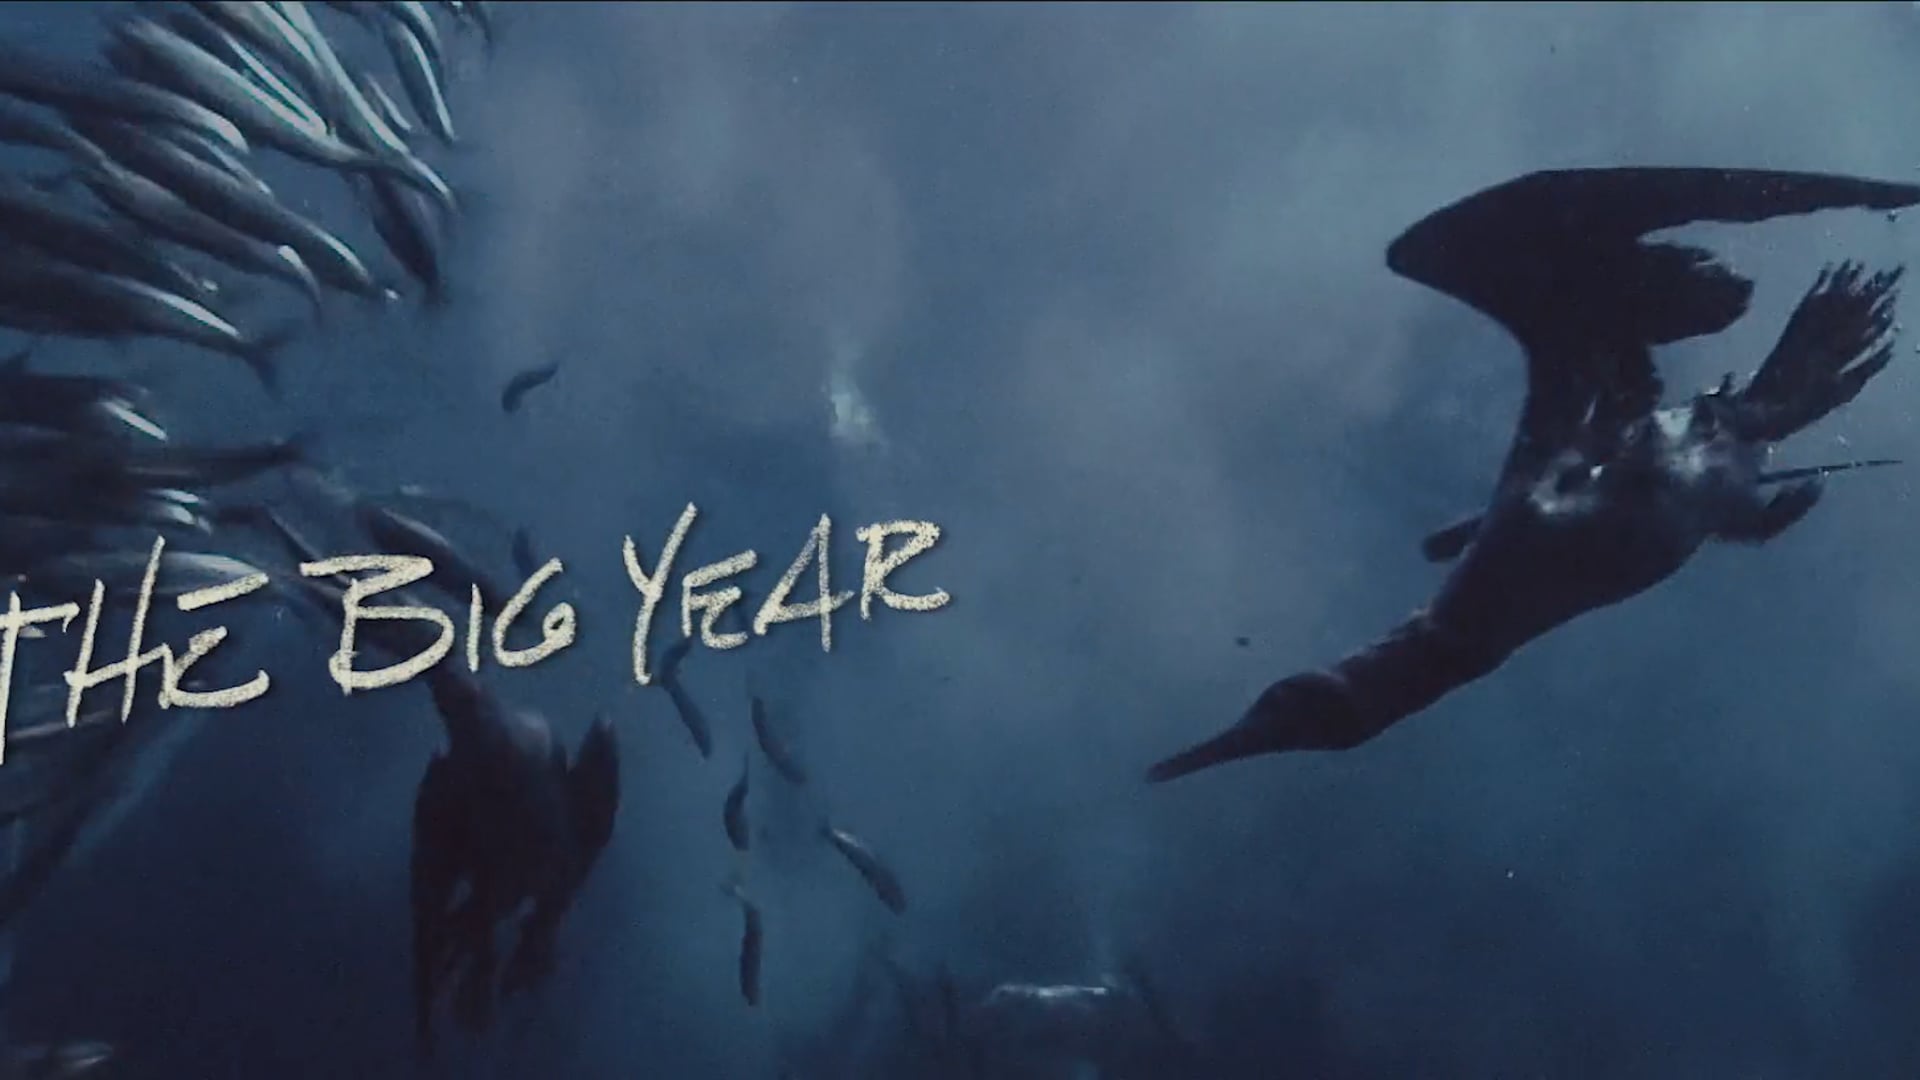 The Big Year - Main Title Sequence